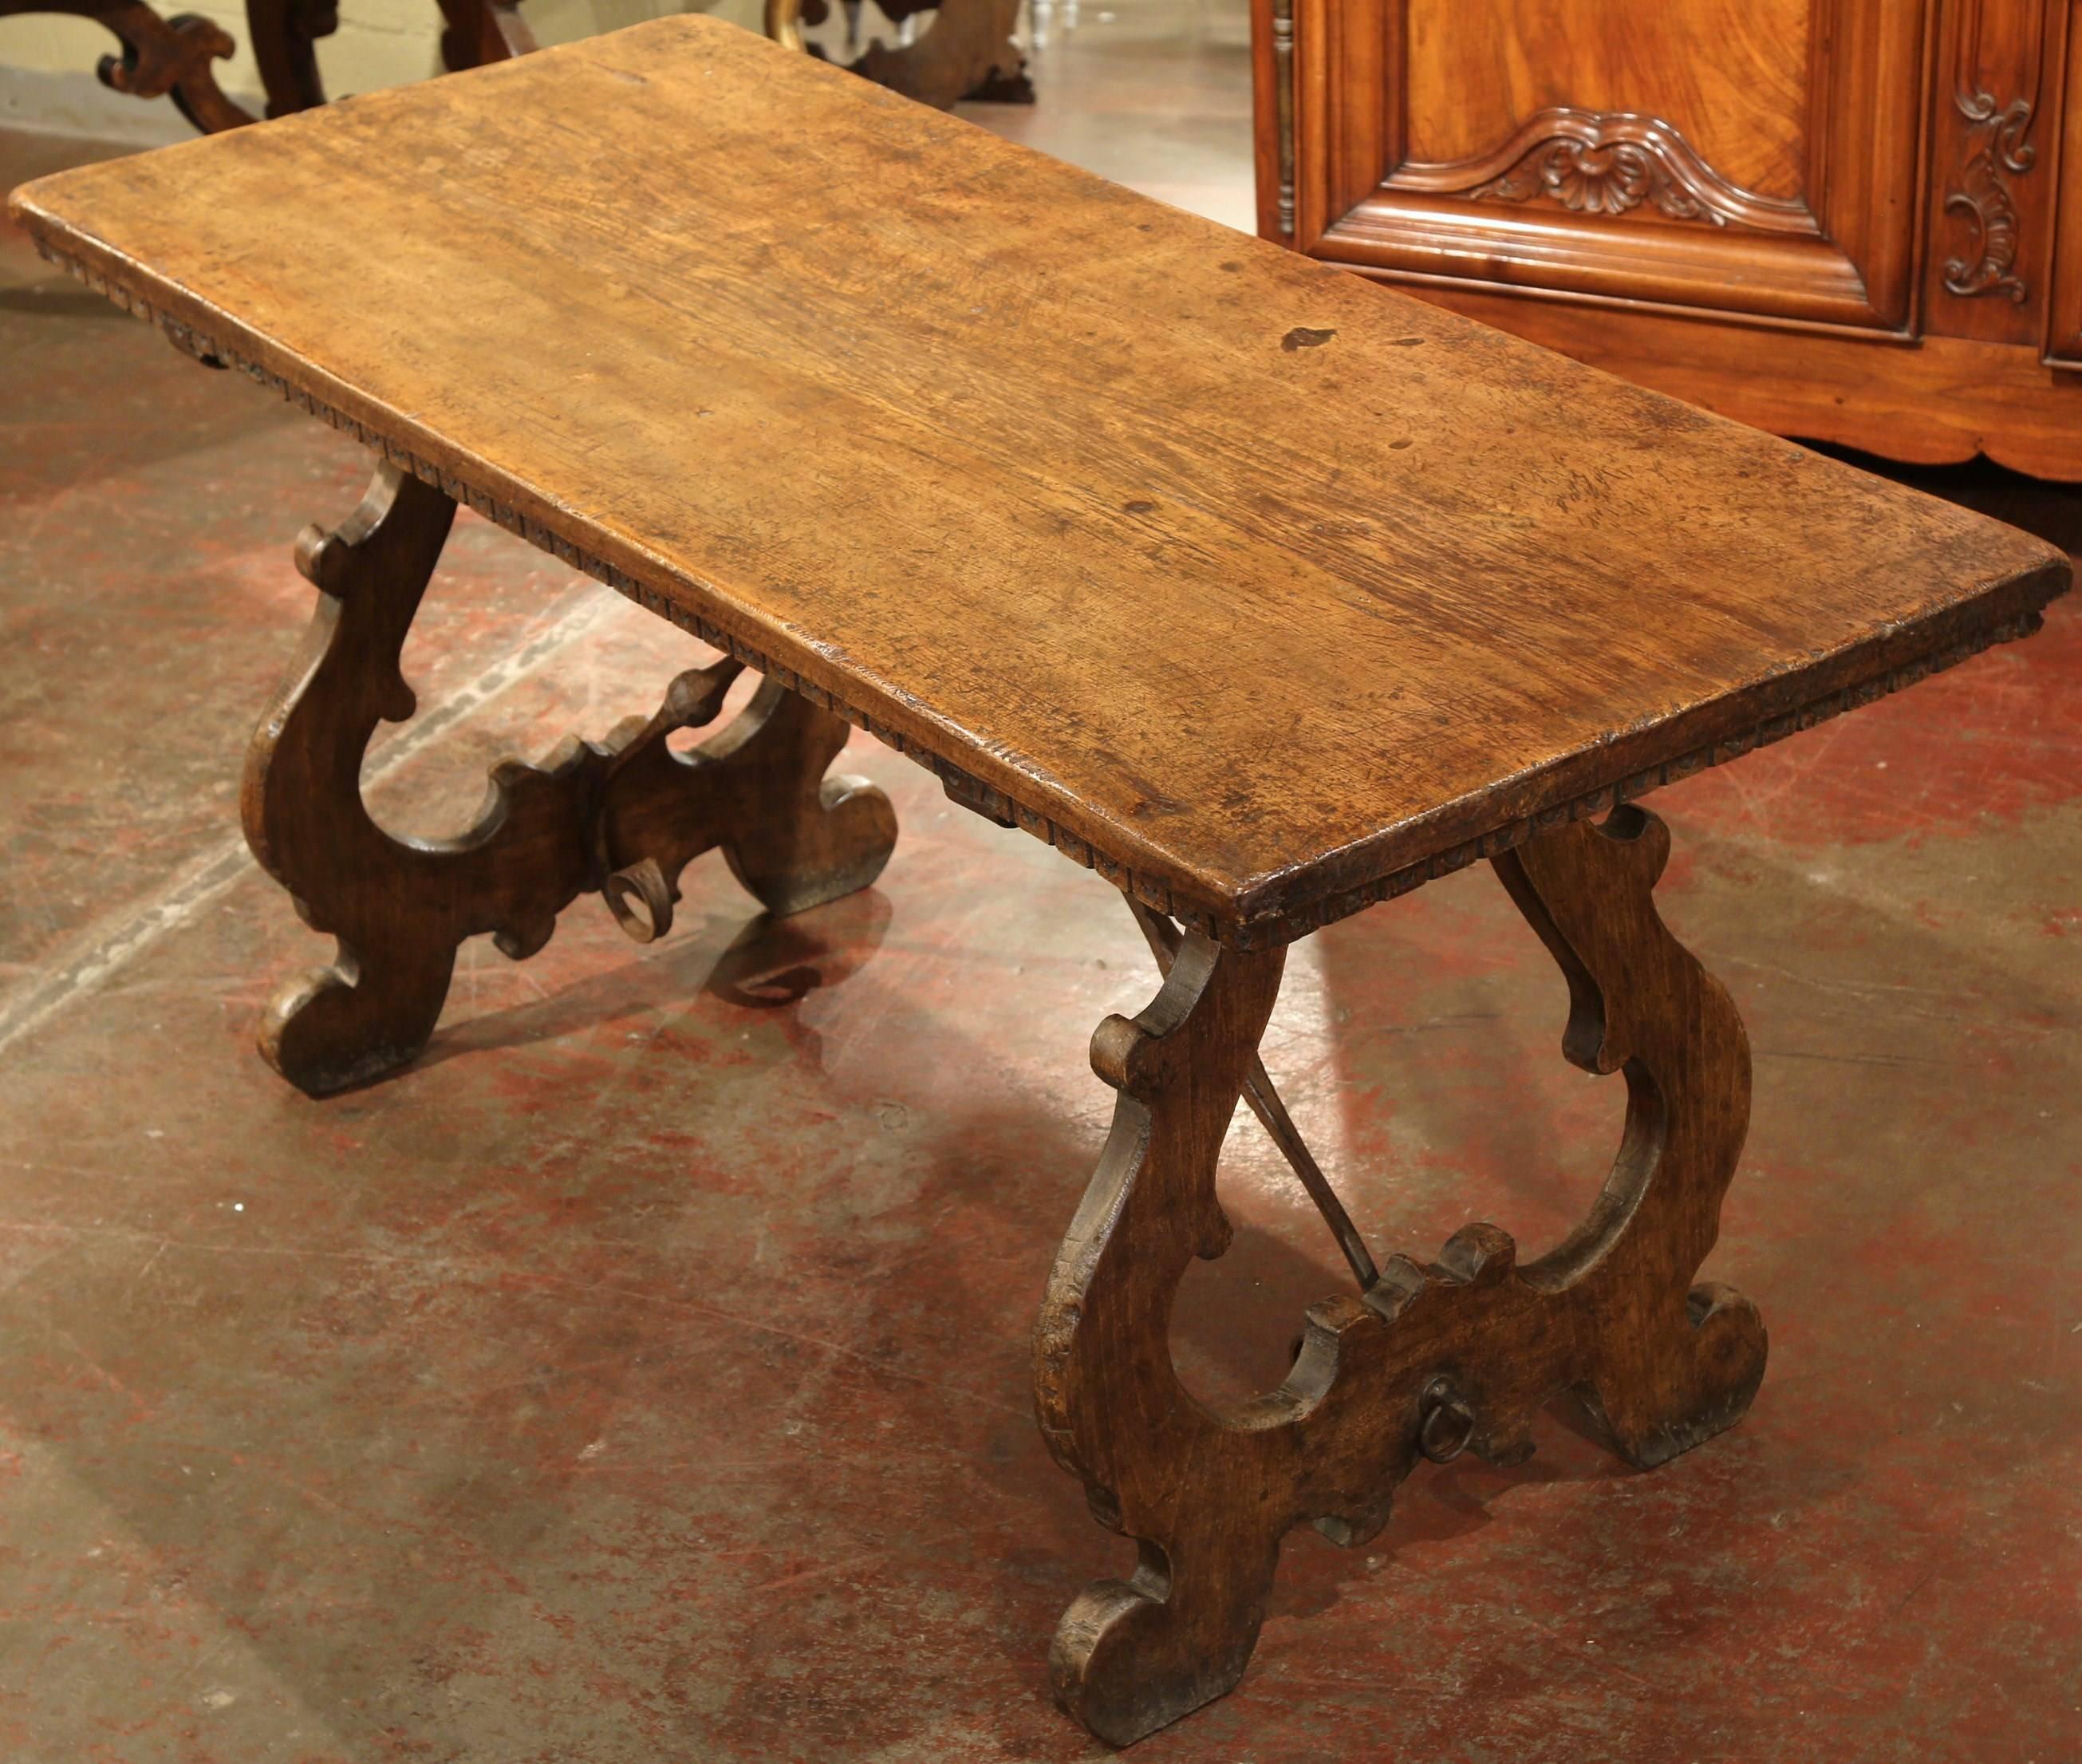 This elegant antique dining room table was crafted in Spain, circa 1850. The fruitwood table has beautiful curved and carved legs, with rounded scroll feet and an forged iron stretcher in between for ultimate stability. The grand tabletop was made